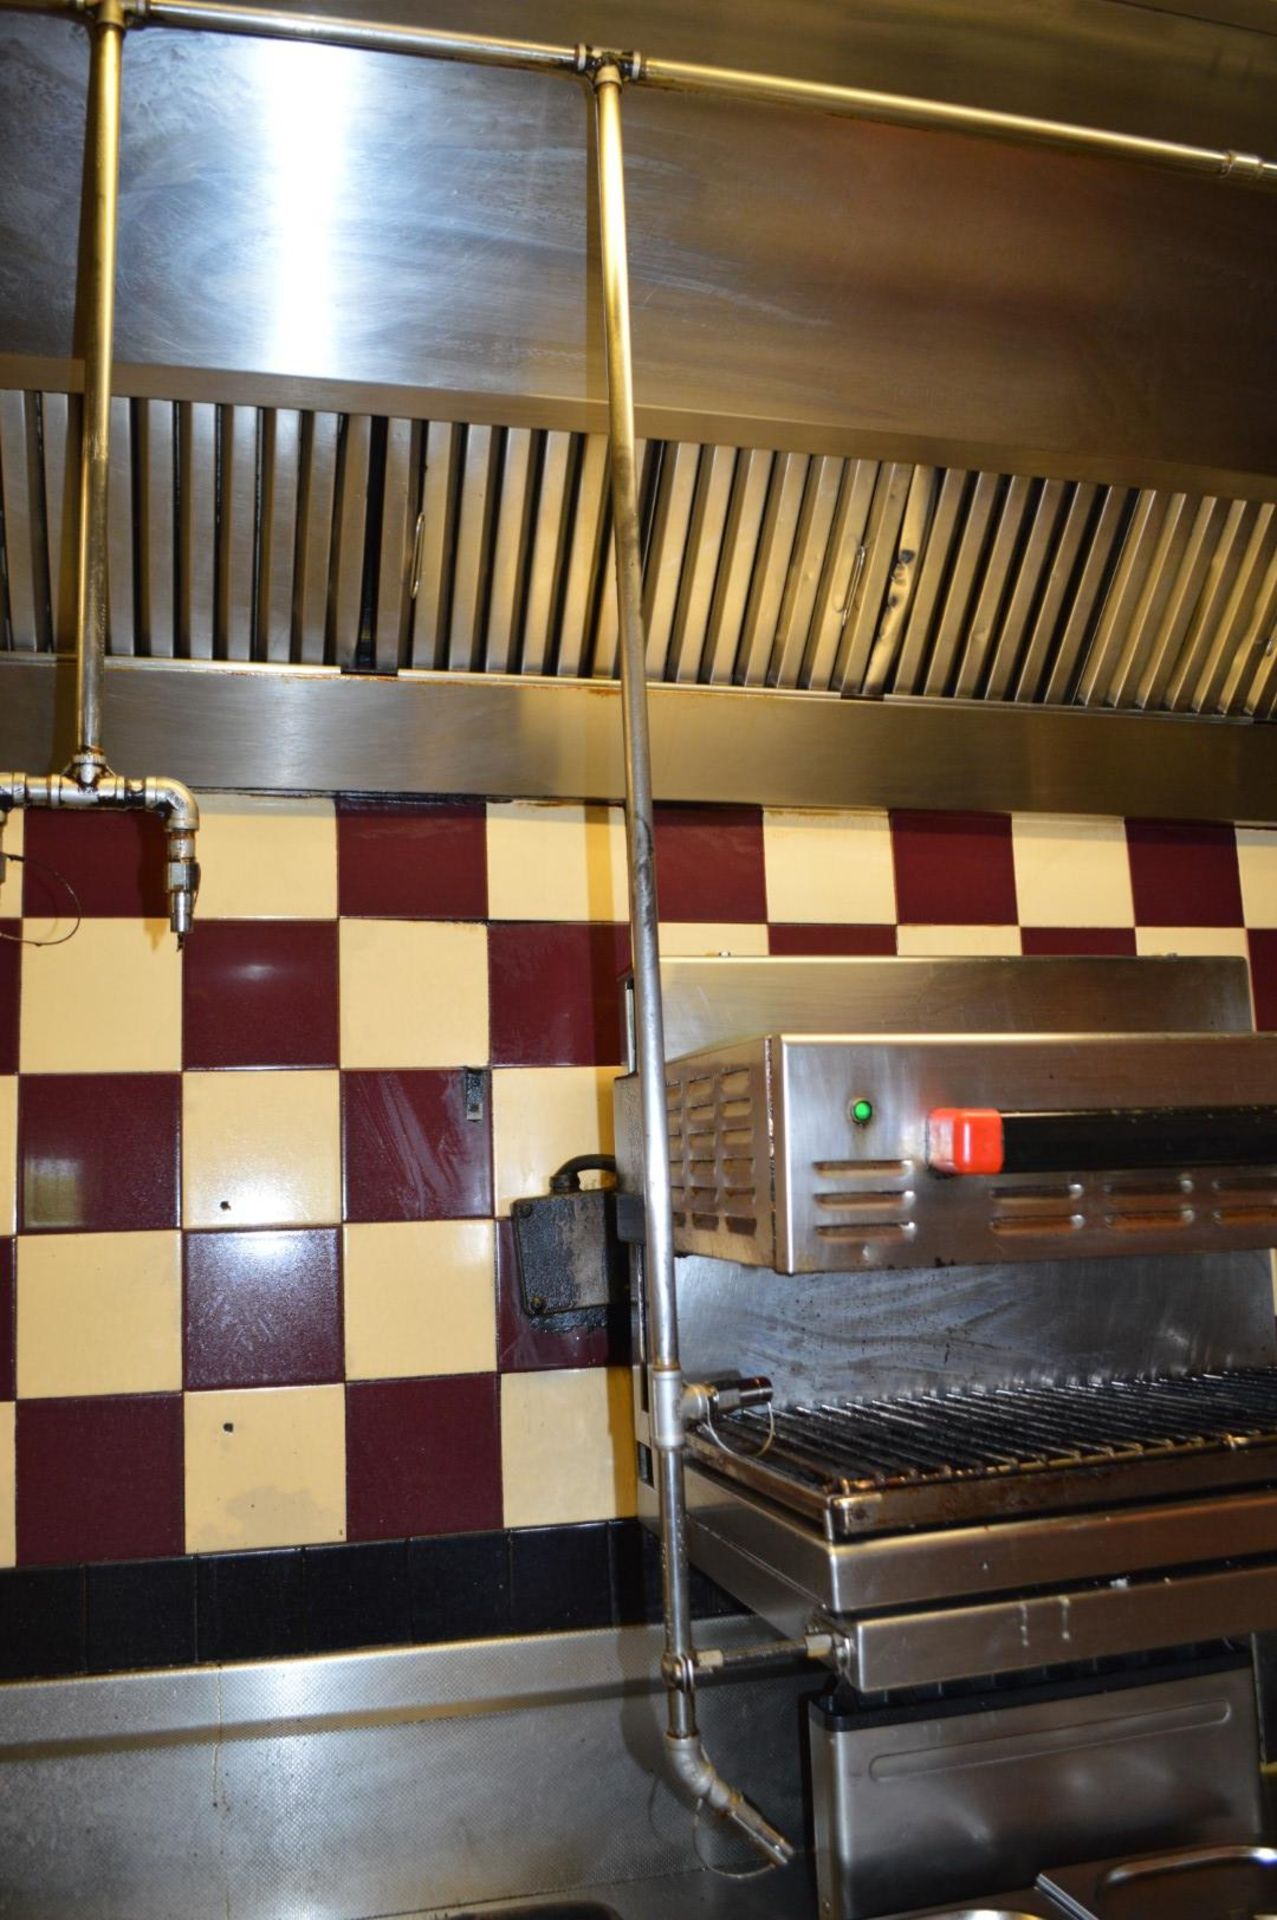 1 x Commercial Stainless Steel Kitchen Extractor Canopy With Ansul R-102 Fire Suppression System - - Image 8 of 13